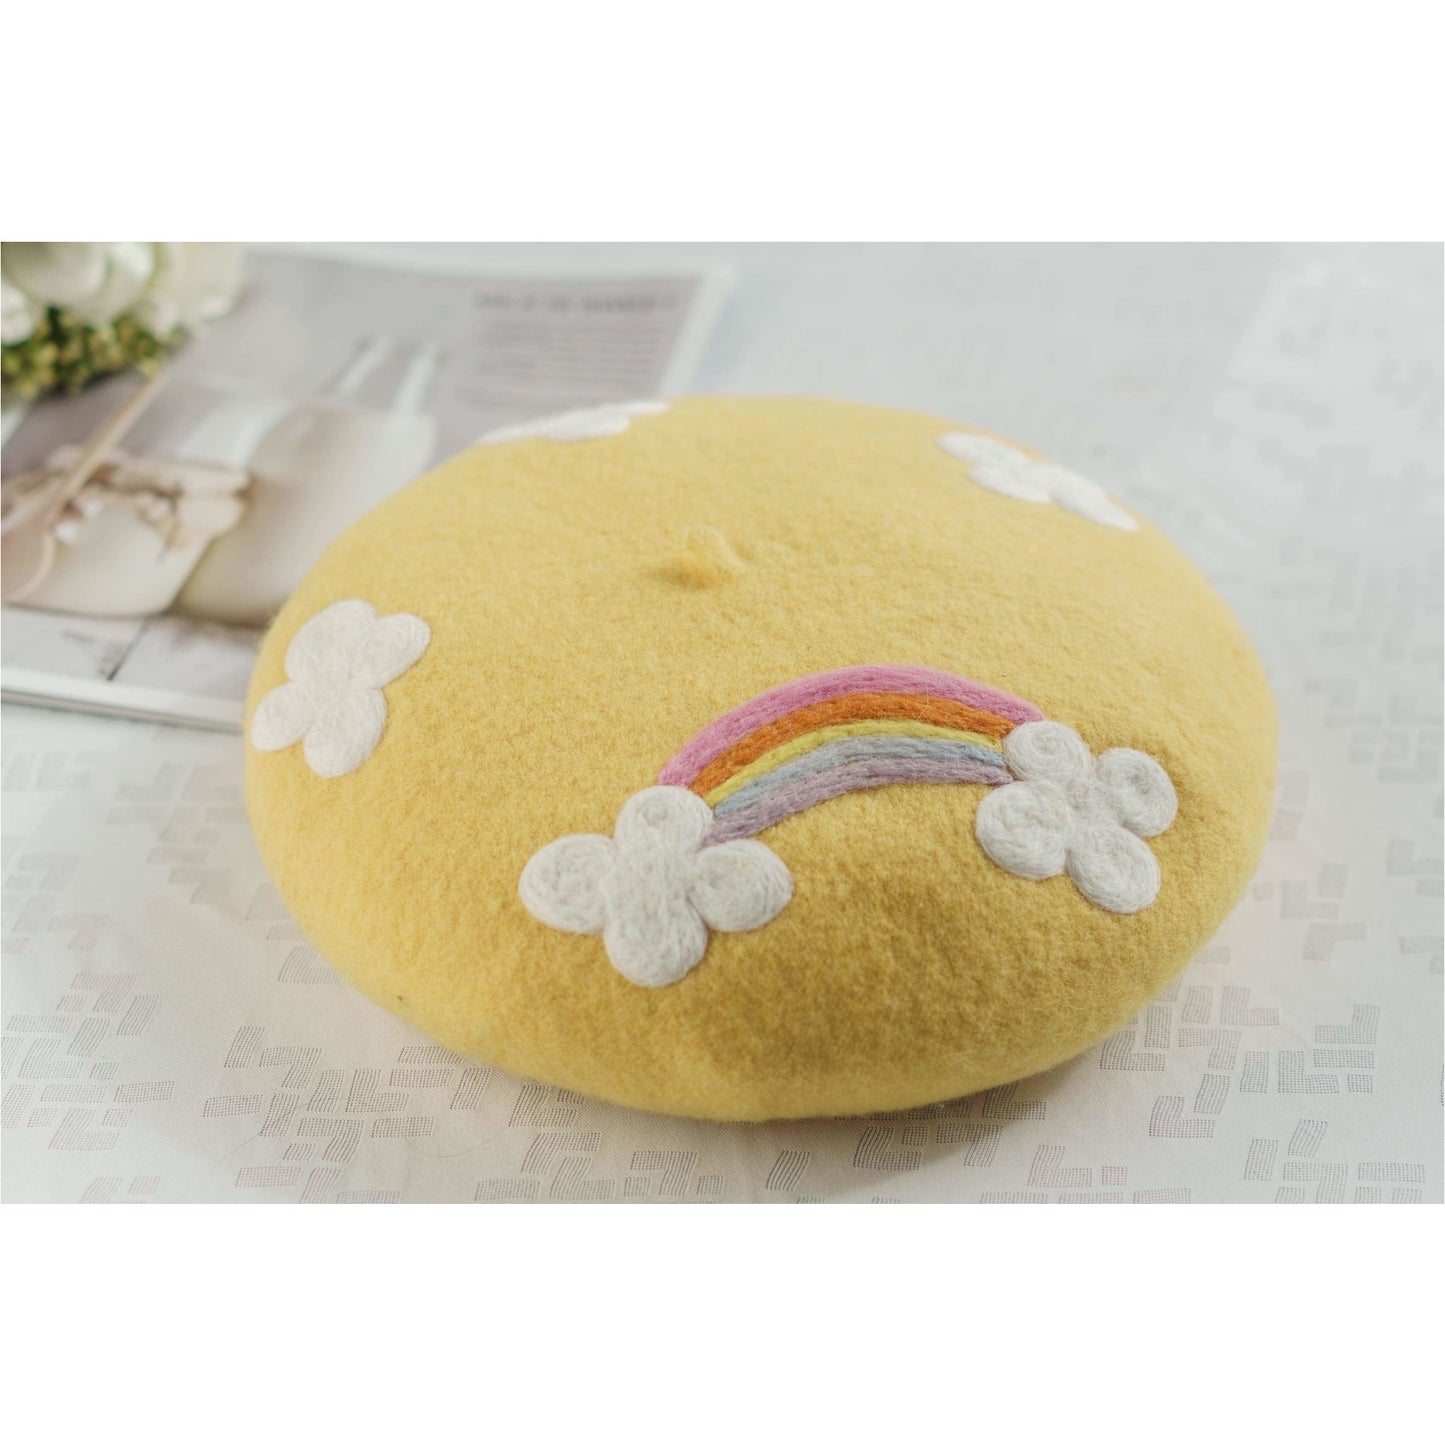 Rainbow beret for women and girls.